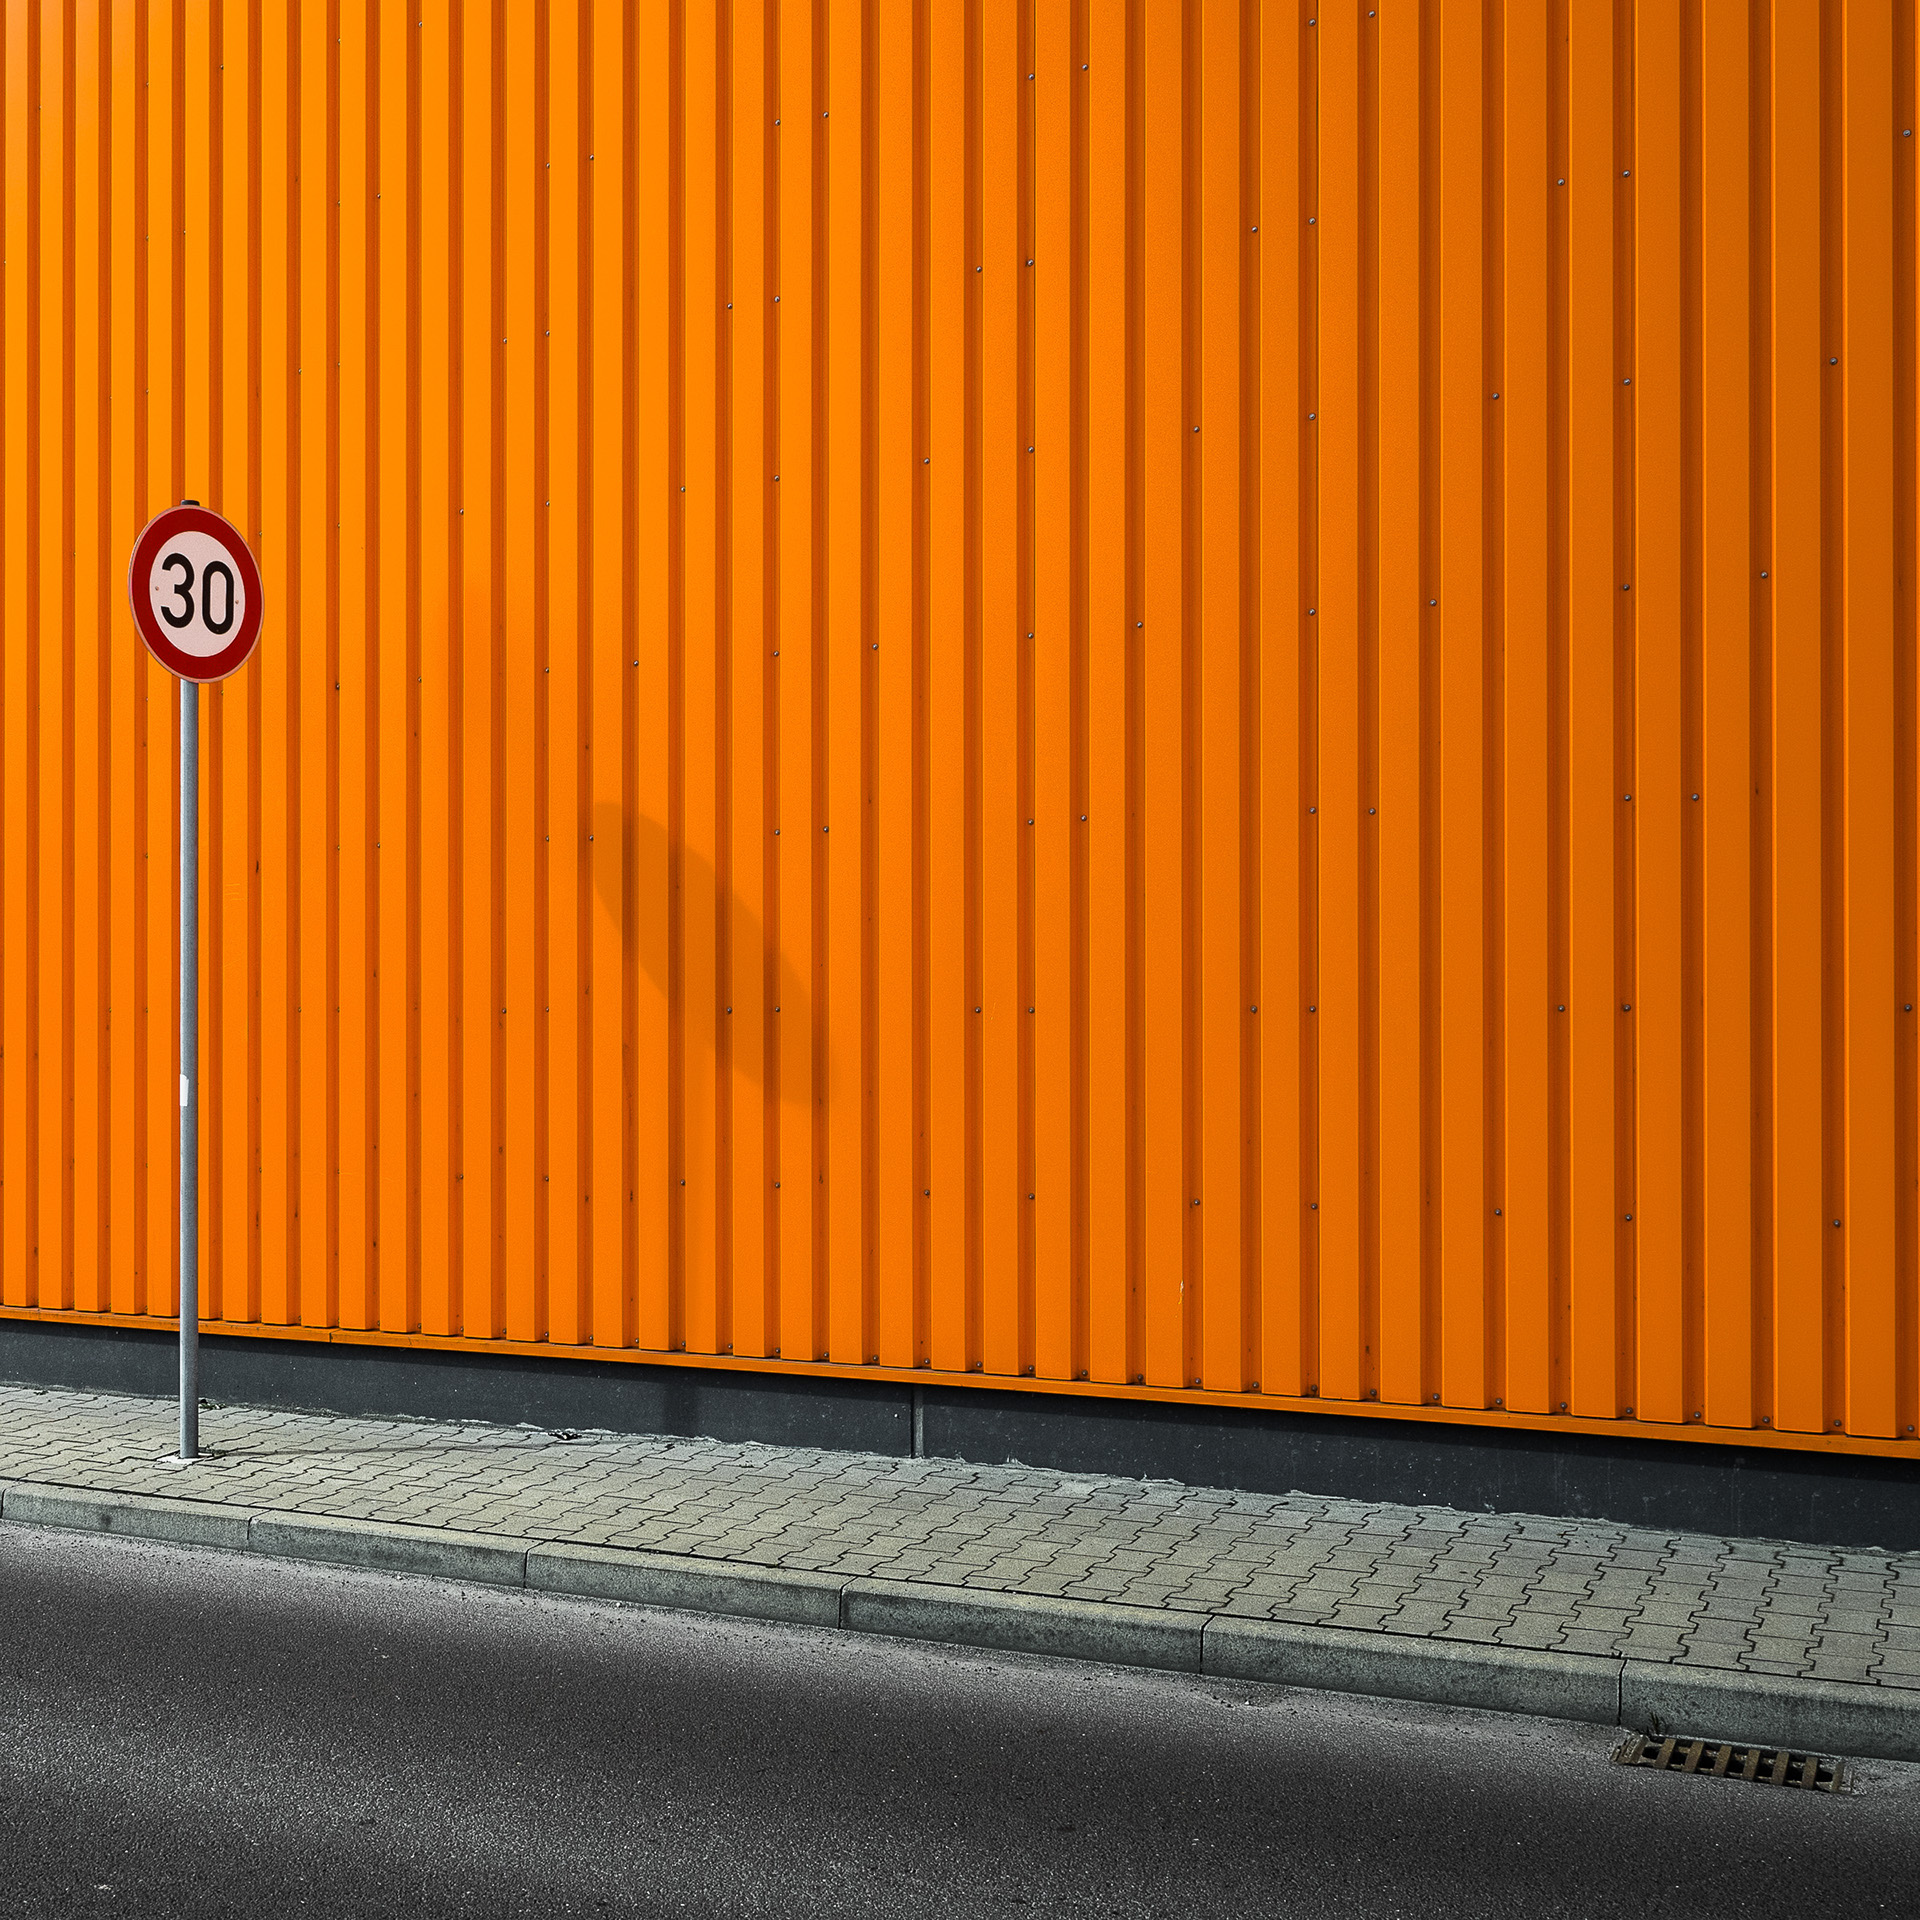 Minimal & Architecture Photography by Andreas Levers